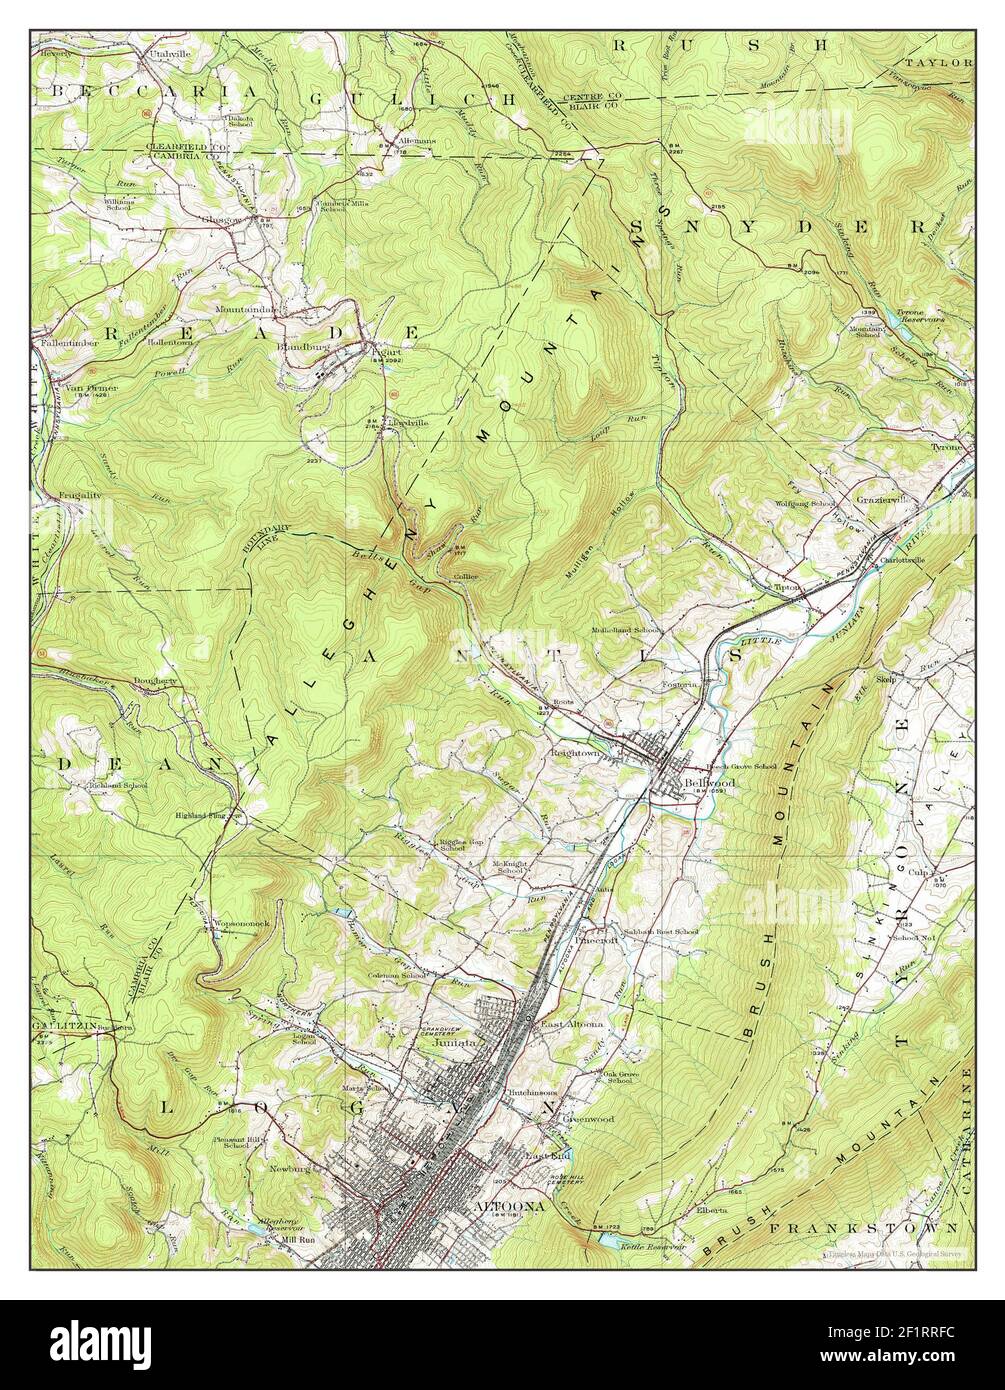 Altoona, Pennsylvania, map 1920, 1:62500, United States of America by Timeless Maps, data U.S. Geological Survey Stock Photo